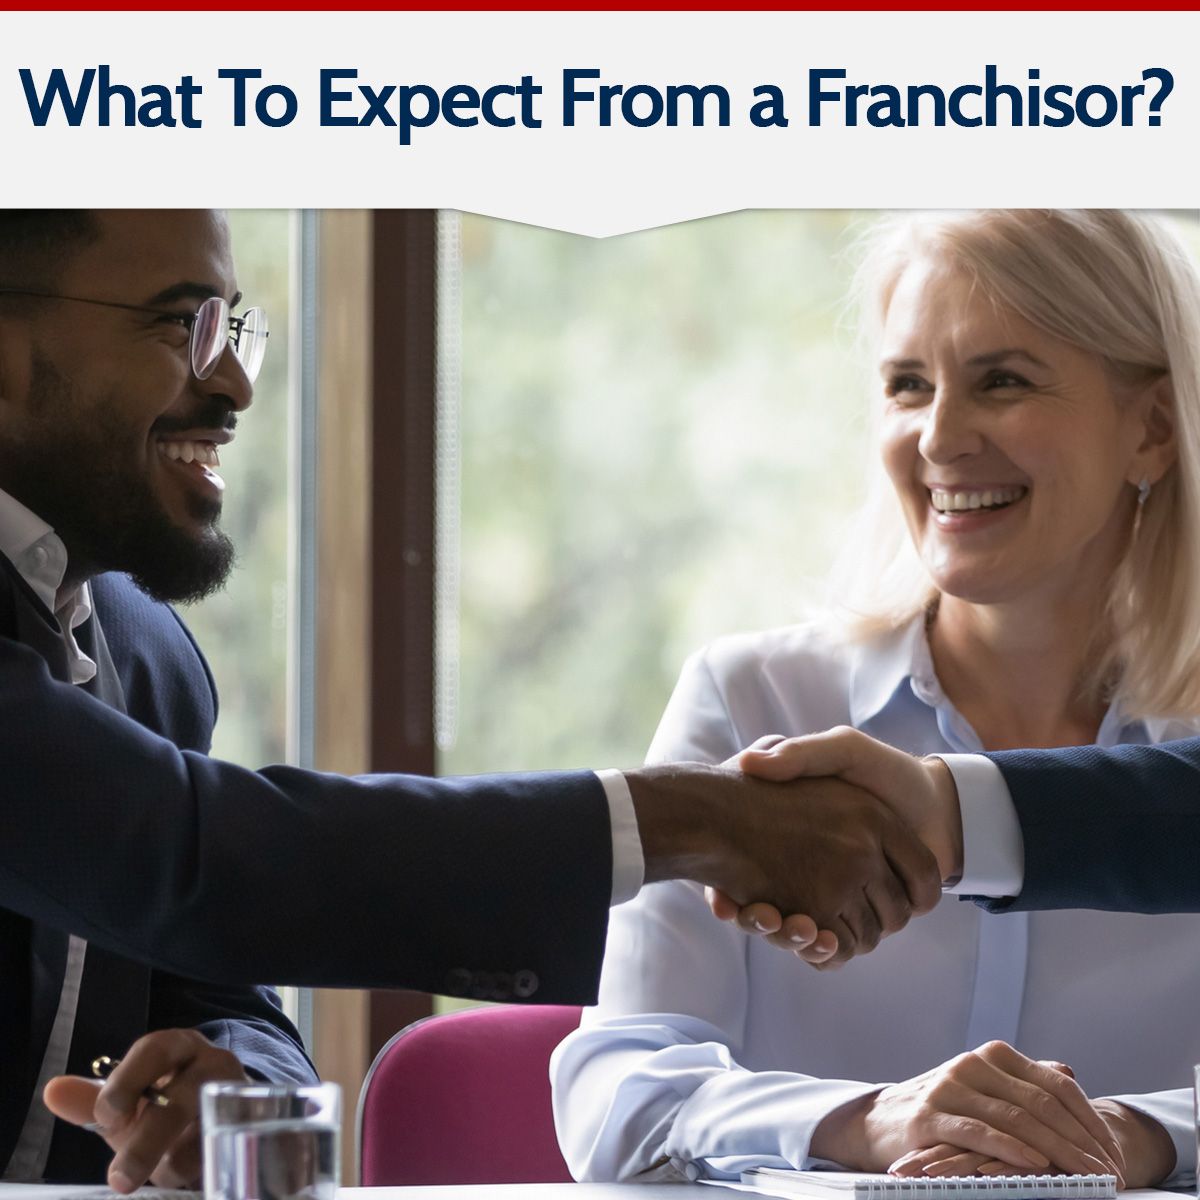 What To Expect From a Franchisor?